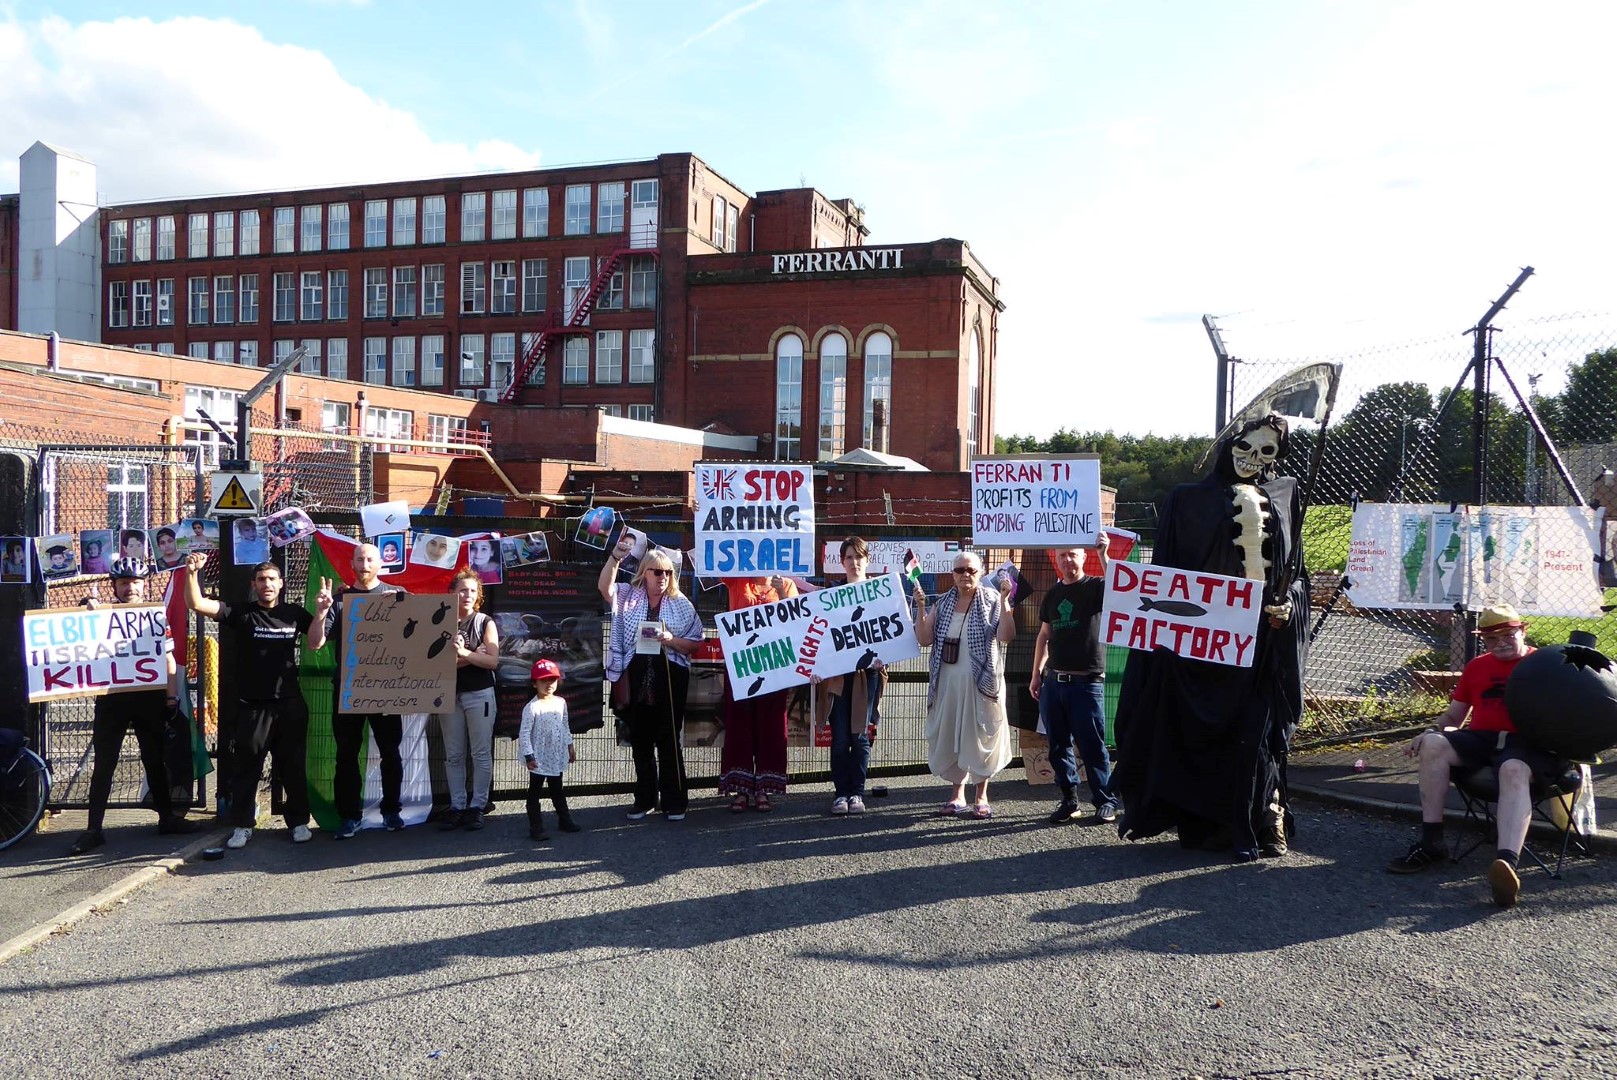 Stop Arming Israel Campaign: Protest at Elbit/Ferranti